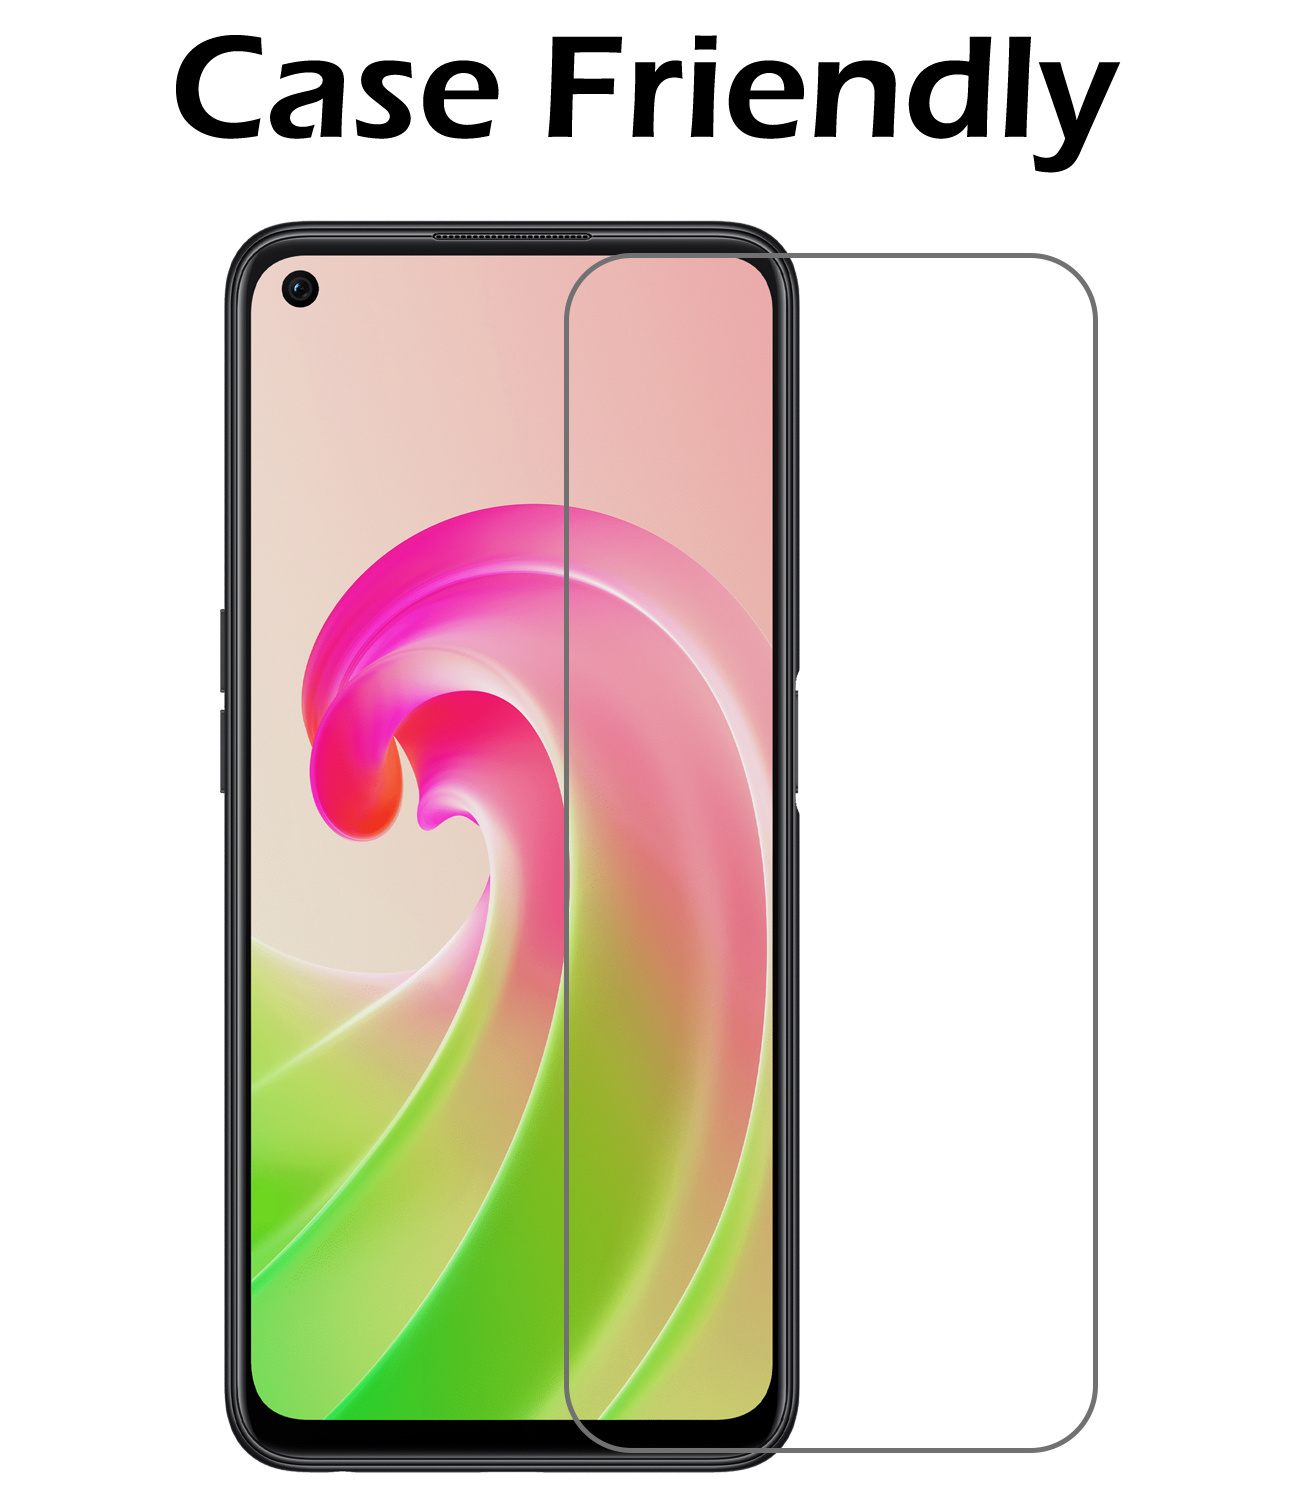 Nomfy OPPO A76 Hoesje Met 2x Screenprotector - OPPO A76 Case Transparant Siliconen - OPPO A76 Hoes Met 2x Screenprotector